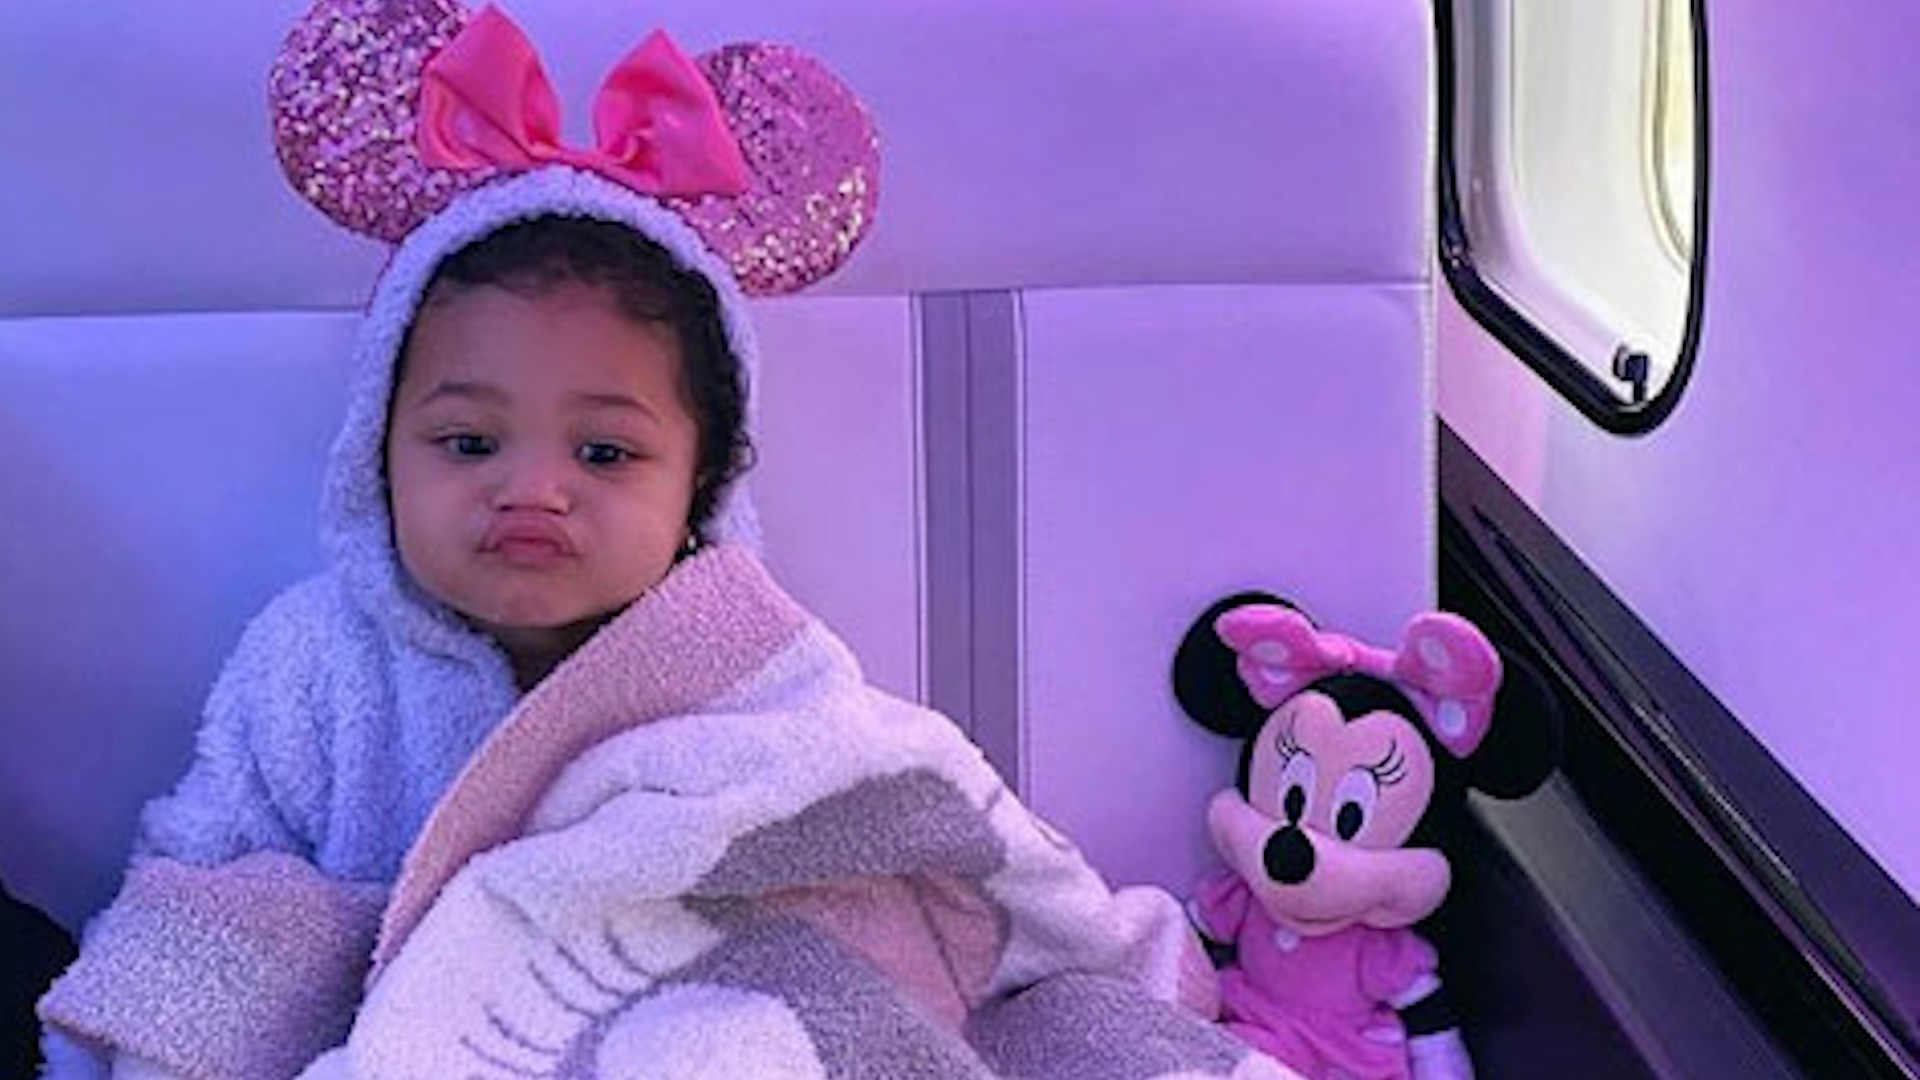 Kylie Jenner Visited Walt Disney World With Daughter Stormi Who